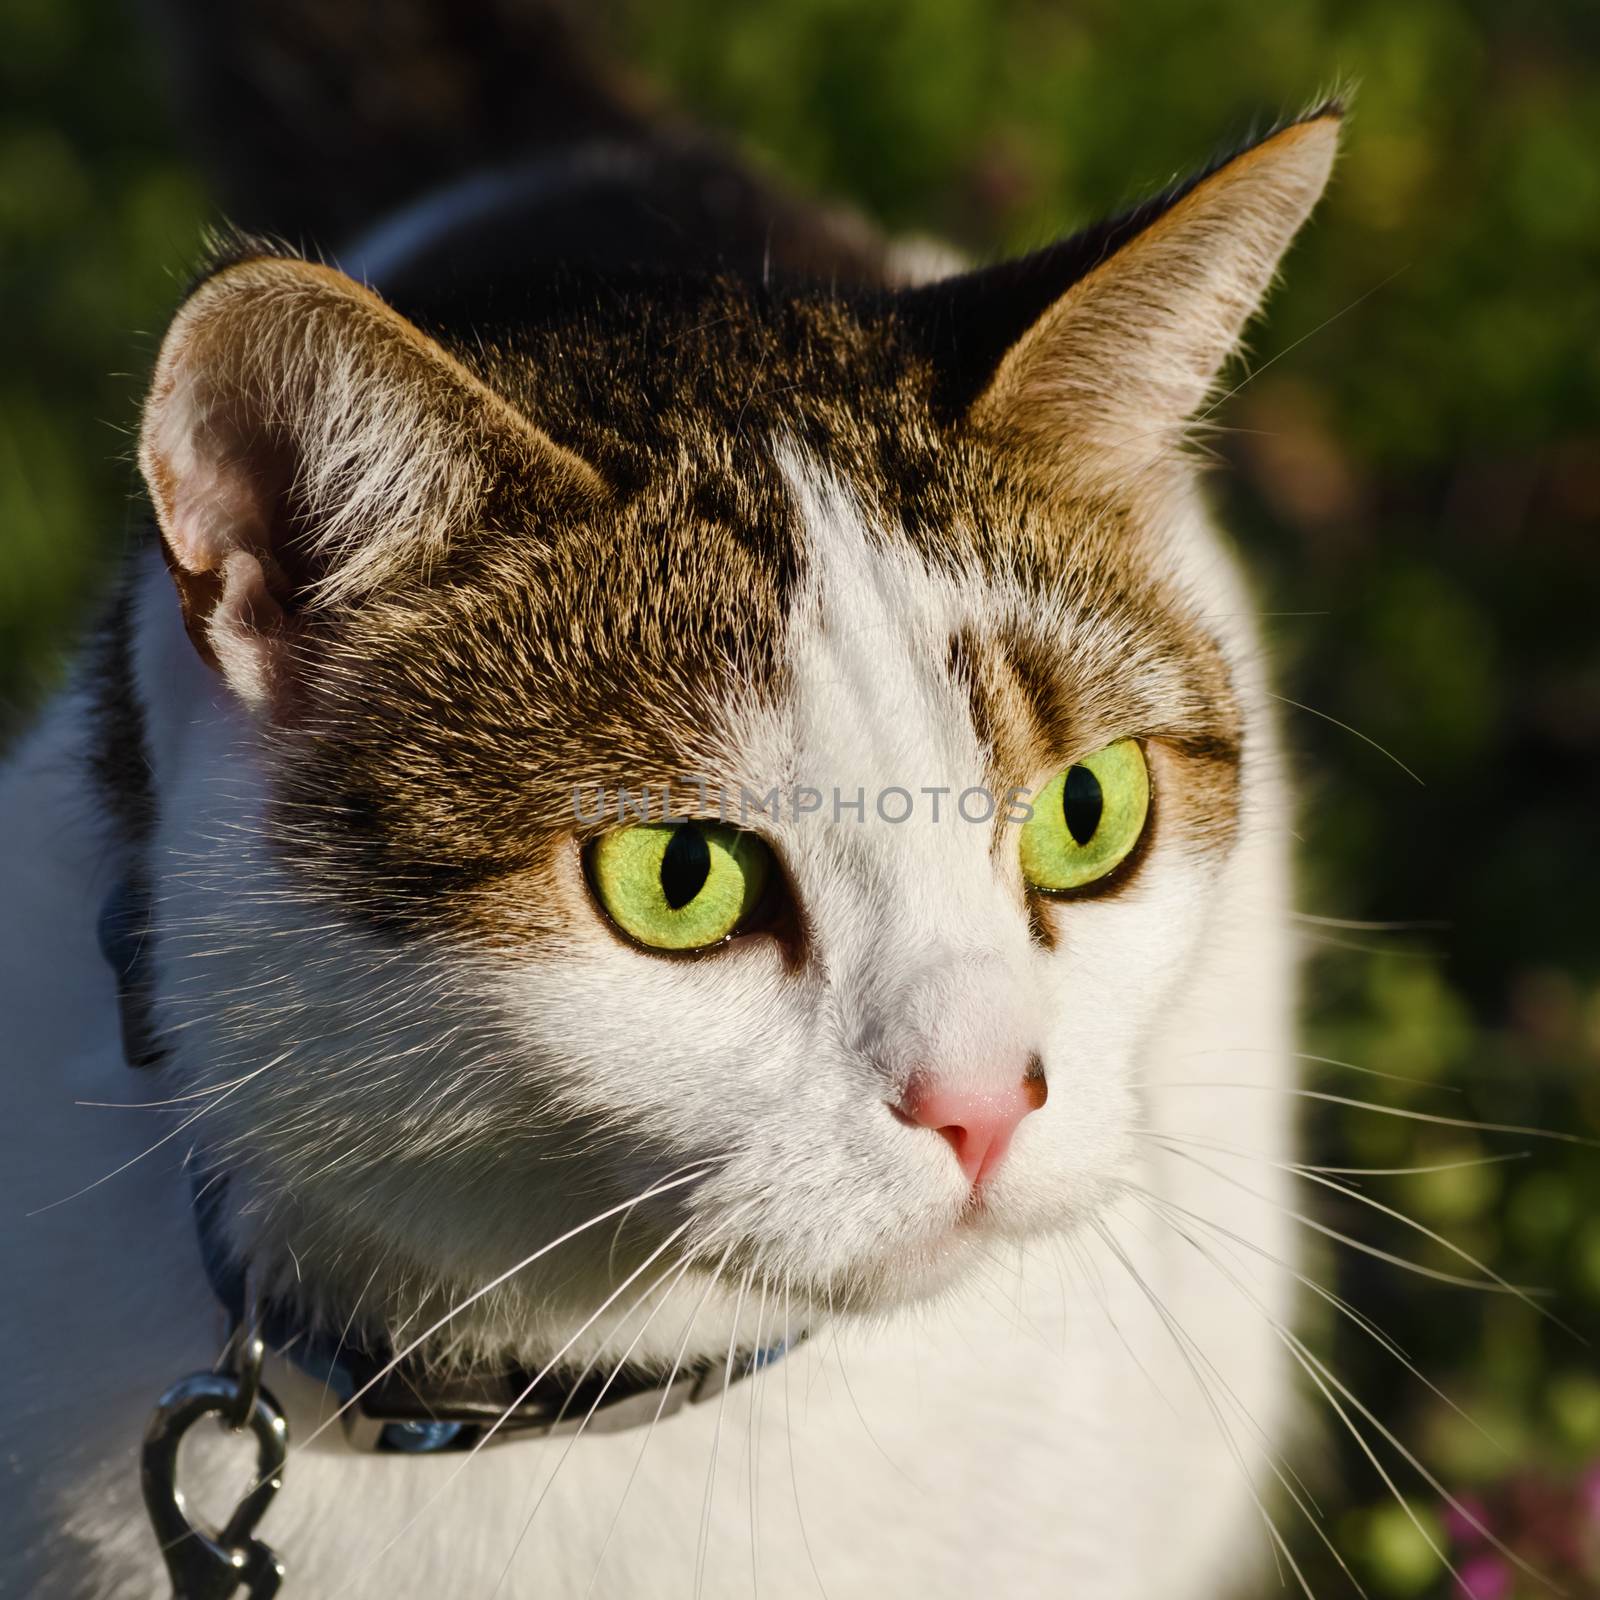 Portrait Of Outbred Domestic Cat With Collar